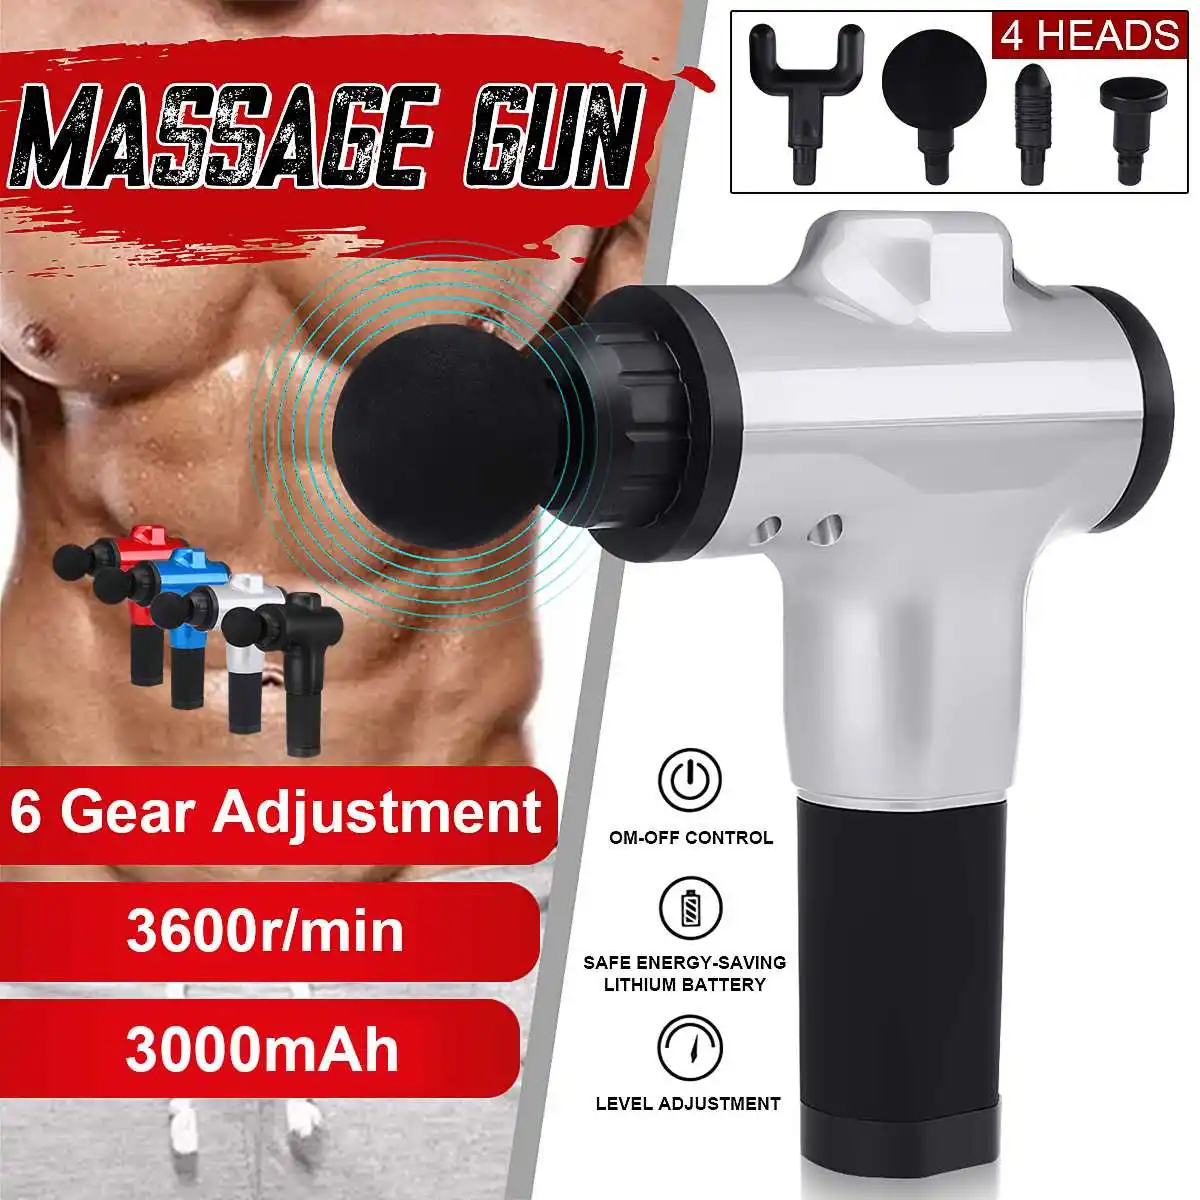 

3600rpm Mini Fascia Gun Therapy Massager High Speed Vibration Decompose Lactic Acid Relief Pain Relax Body Slimming With 4 Head